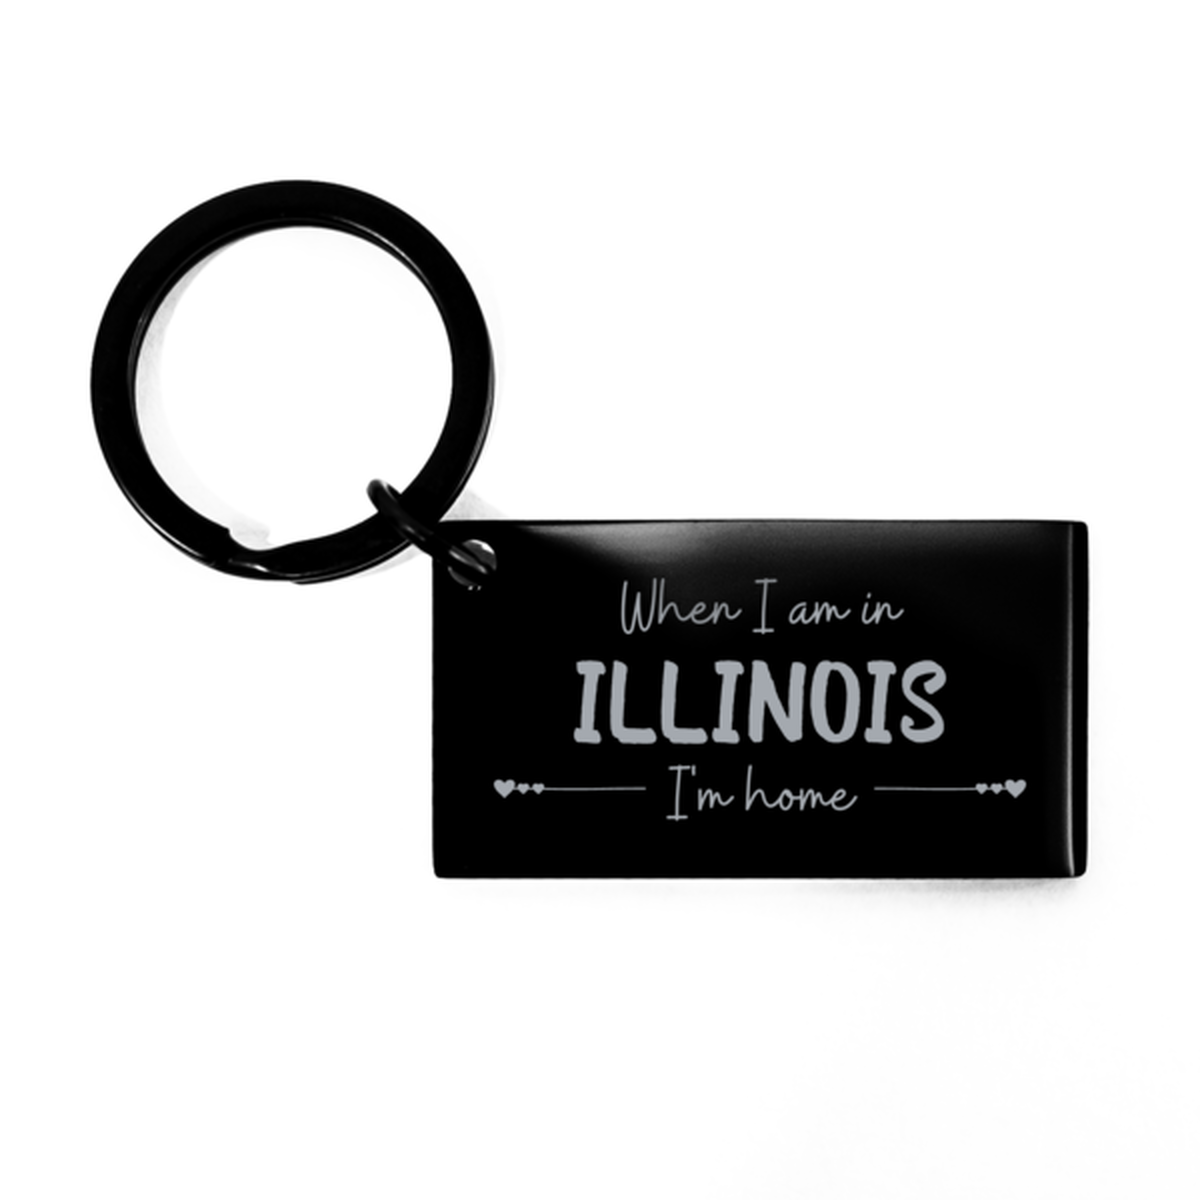 When I am in Illinois I'm home Keychain, Cheap Gifts For Illinois, State Illinois Birthday Gifts for Friends Coworker